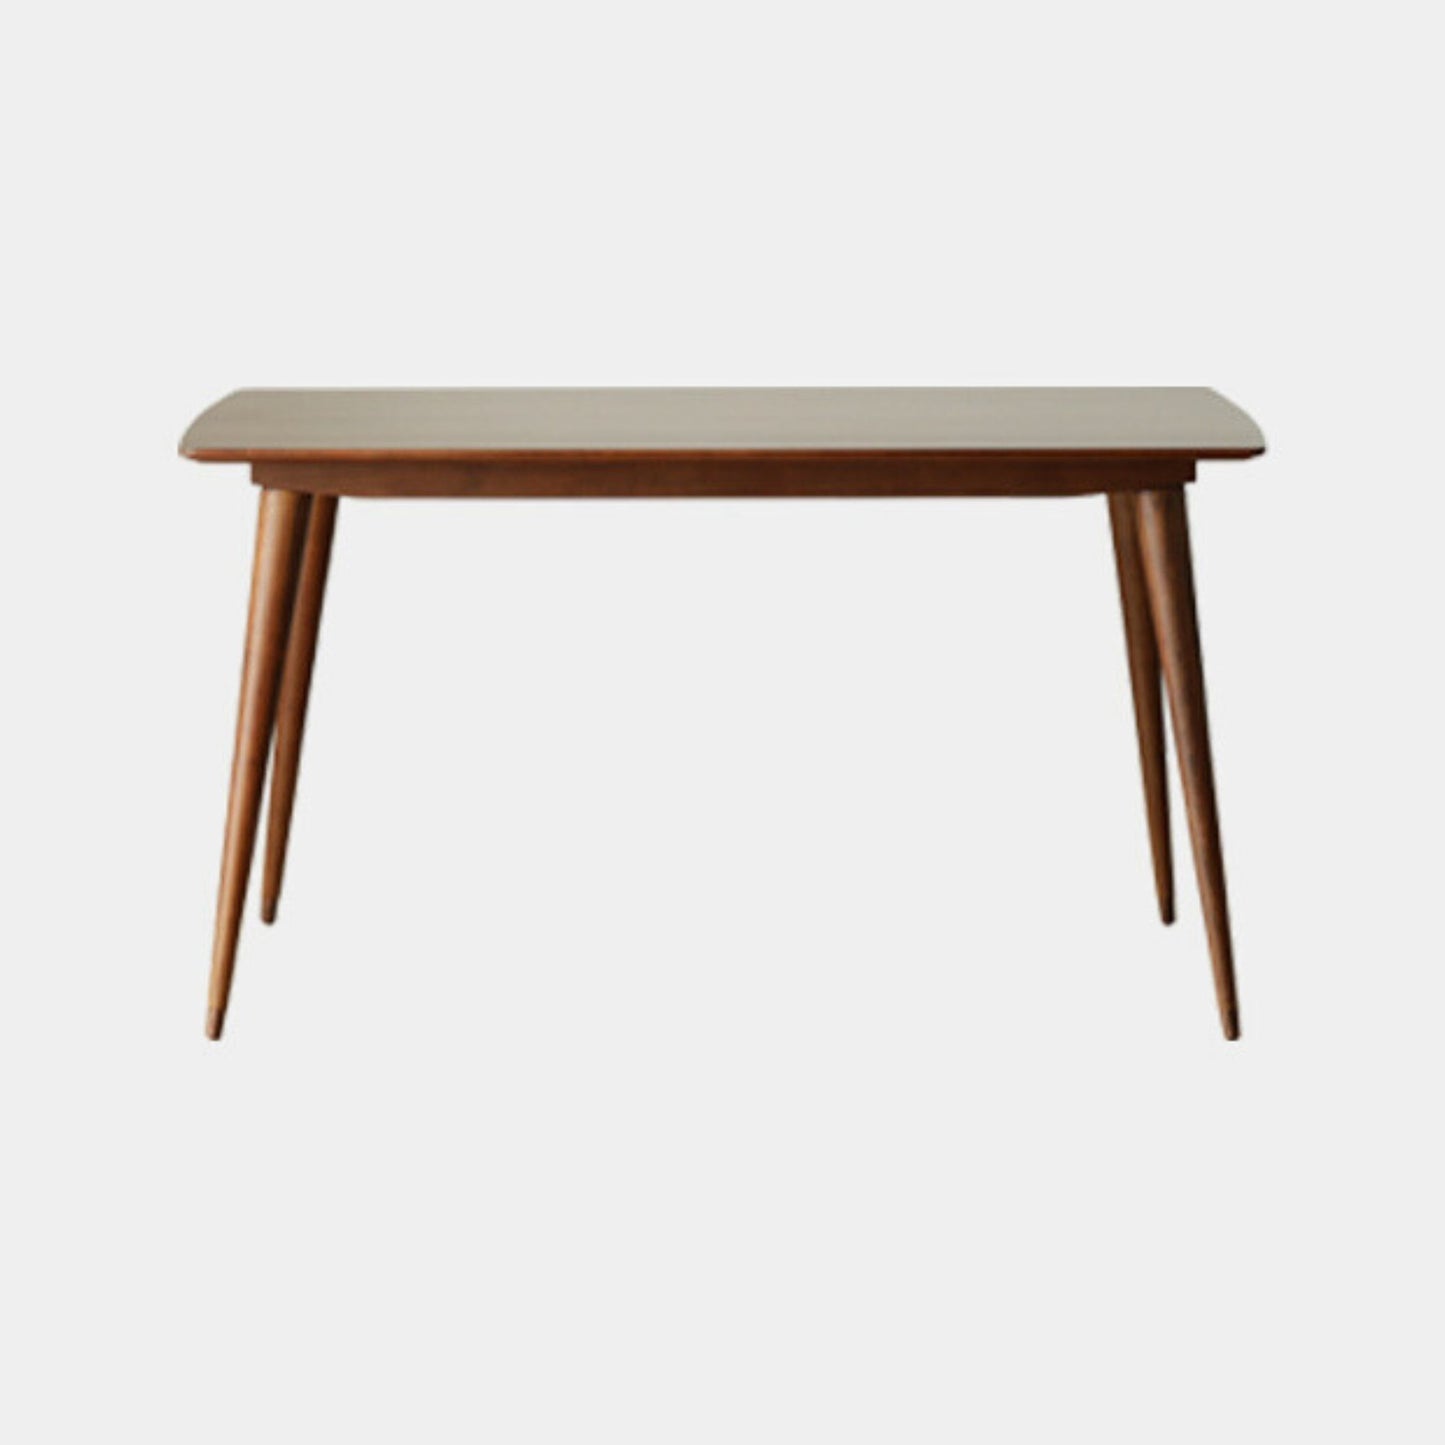 Tate wood dining table